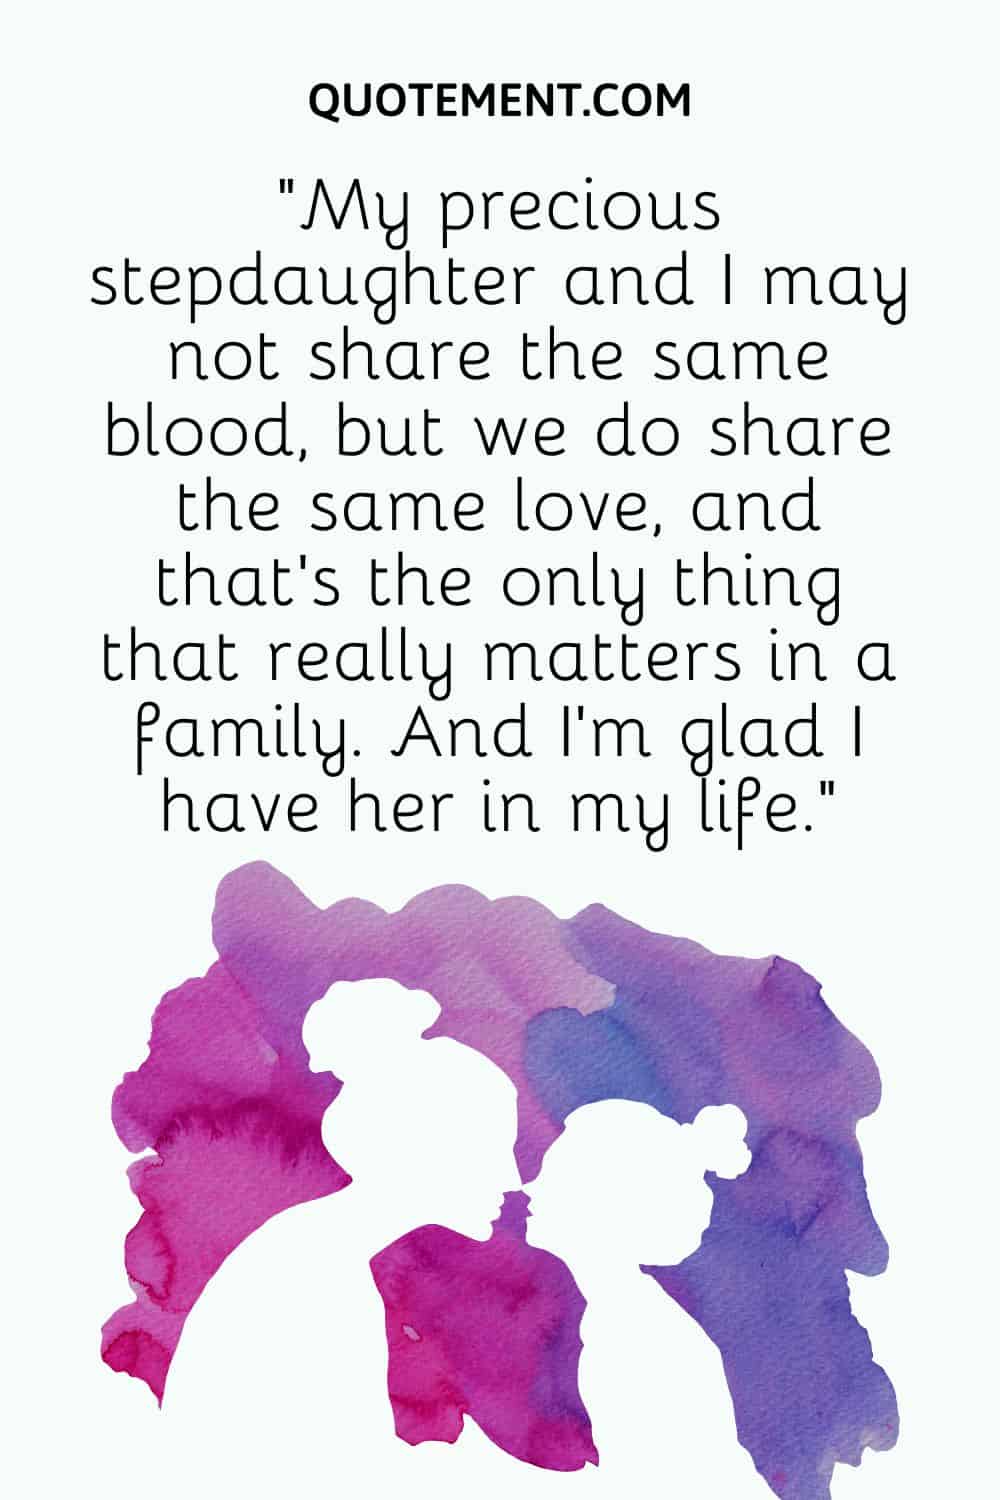 My precious stepdaughter and I may not share the same blood, but we do share the same love